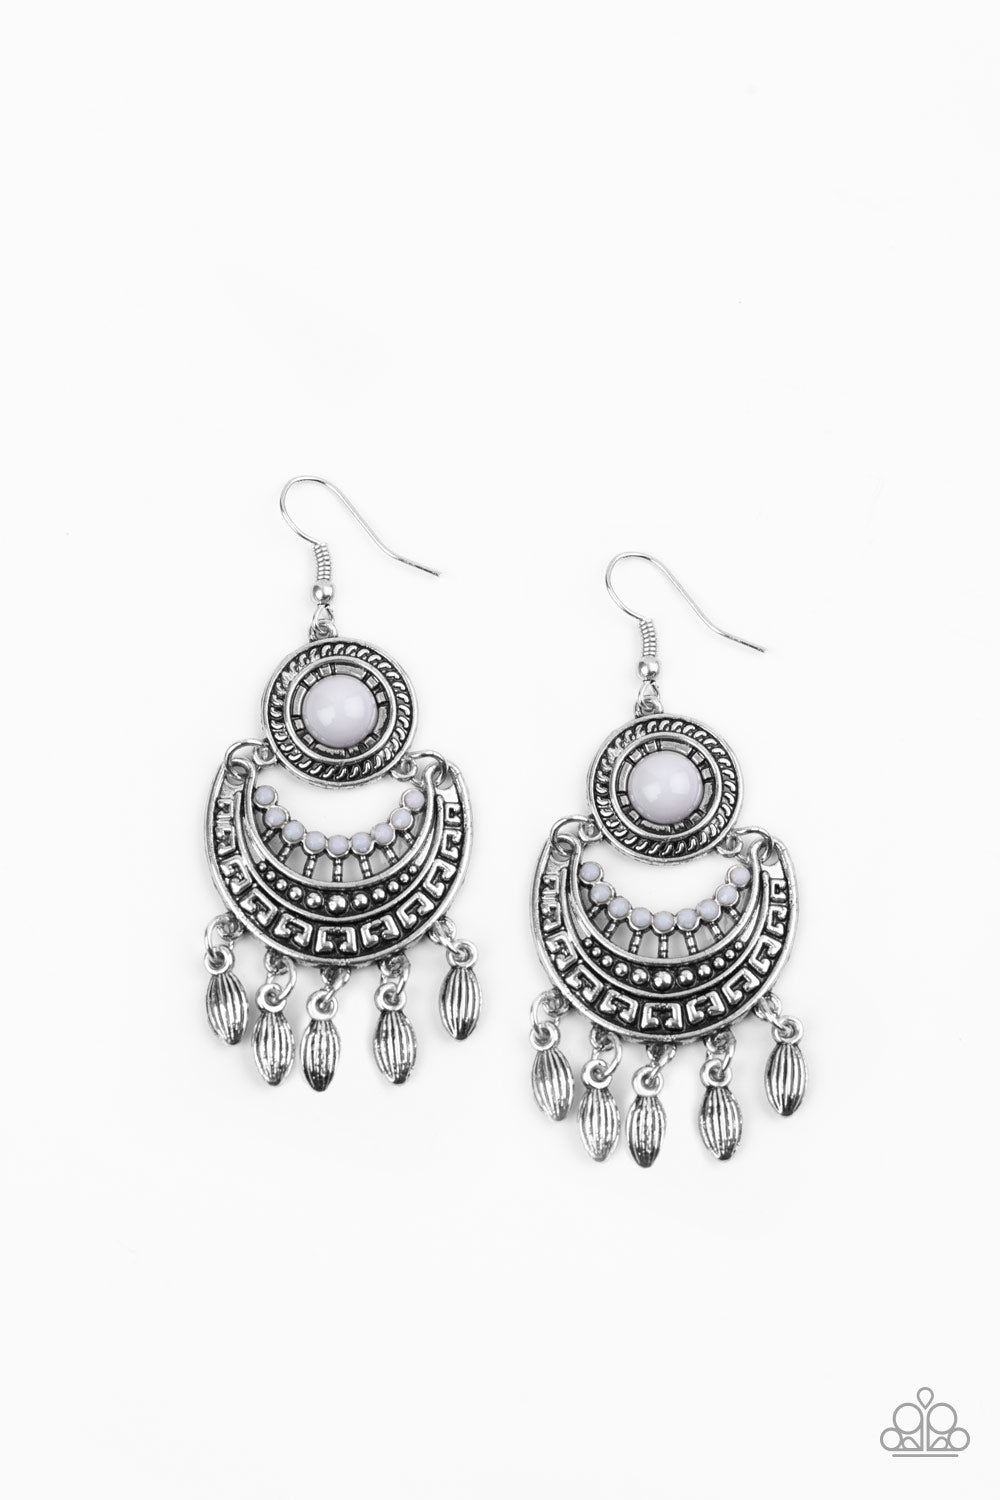 MANTRA TO MANTRA - SILVER GRAY BEADS TRIBAL ETCHED SILVER FRINGE EARRINGS